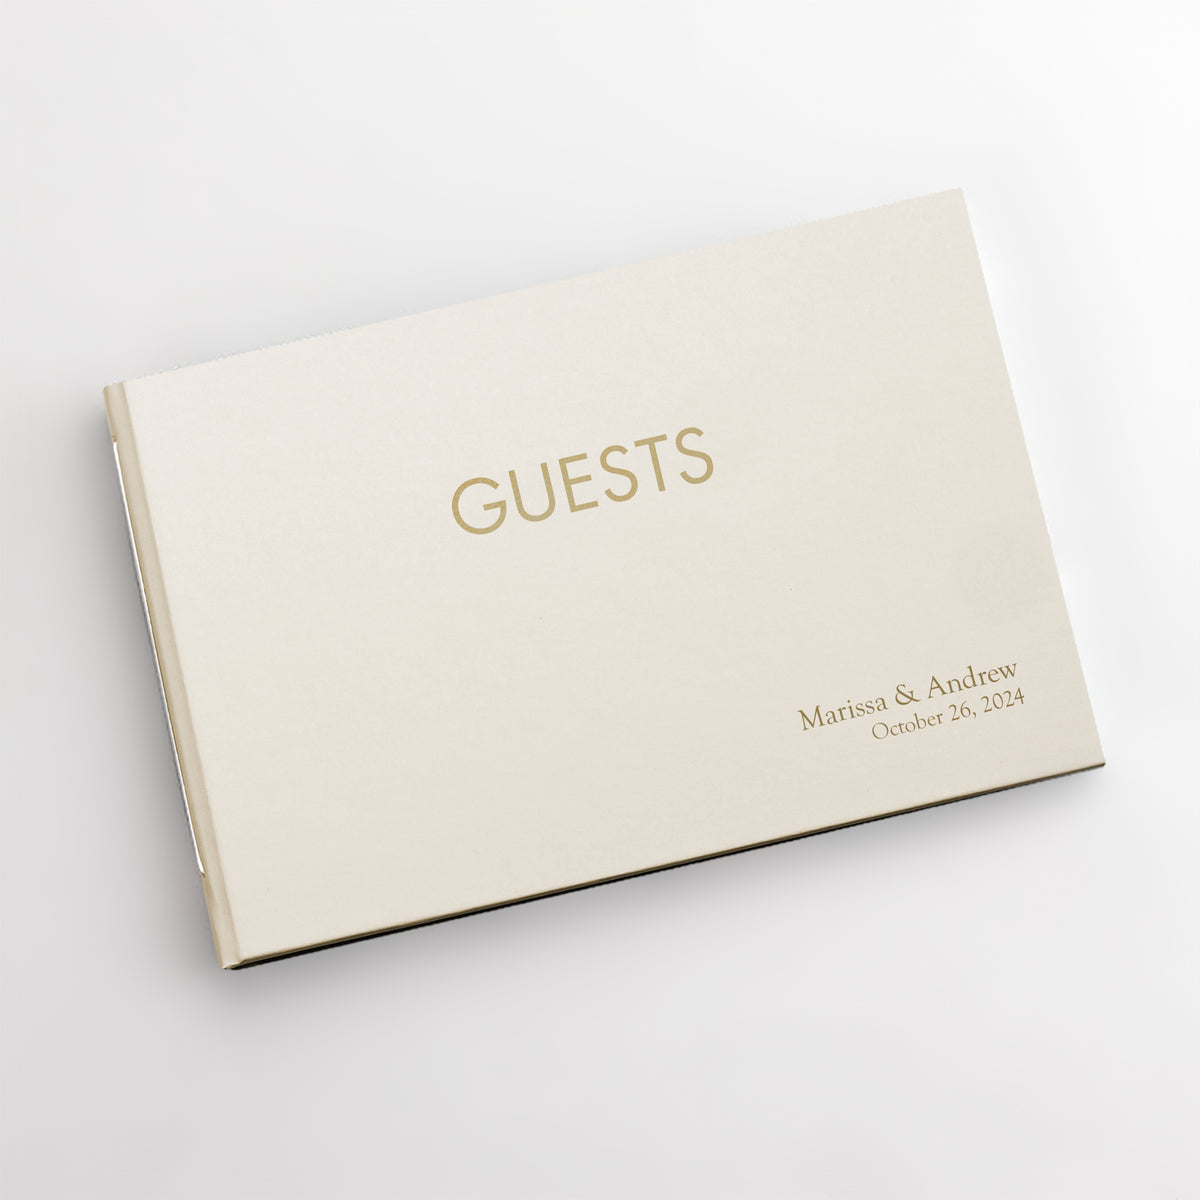 Guestbook Embossed with “Guests” | Cover: Pearl Vegan Leather | Available Personalized